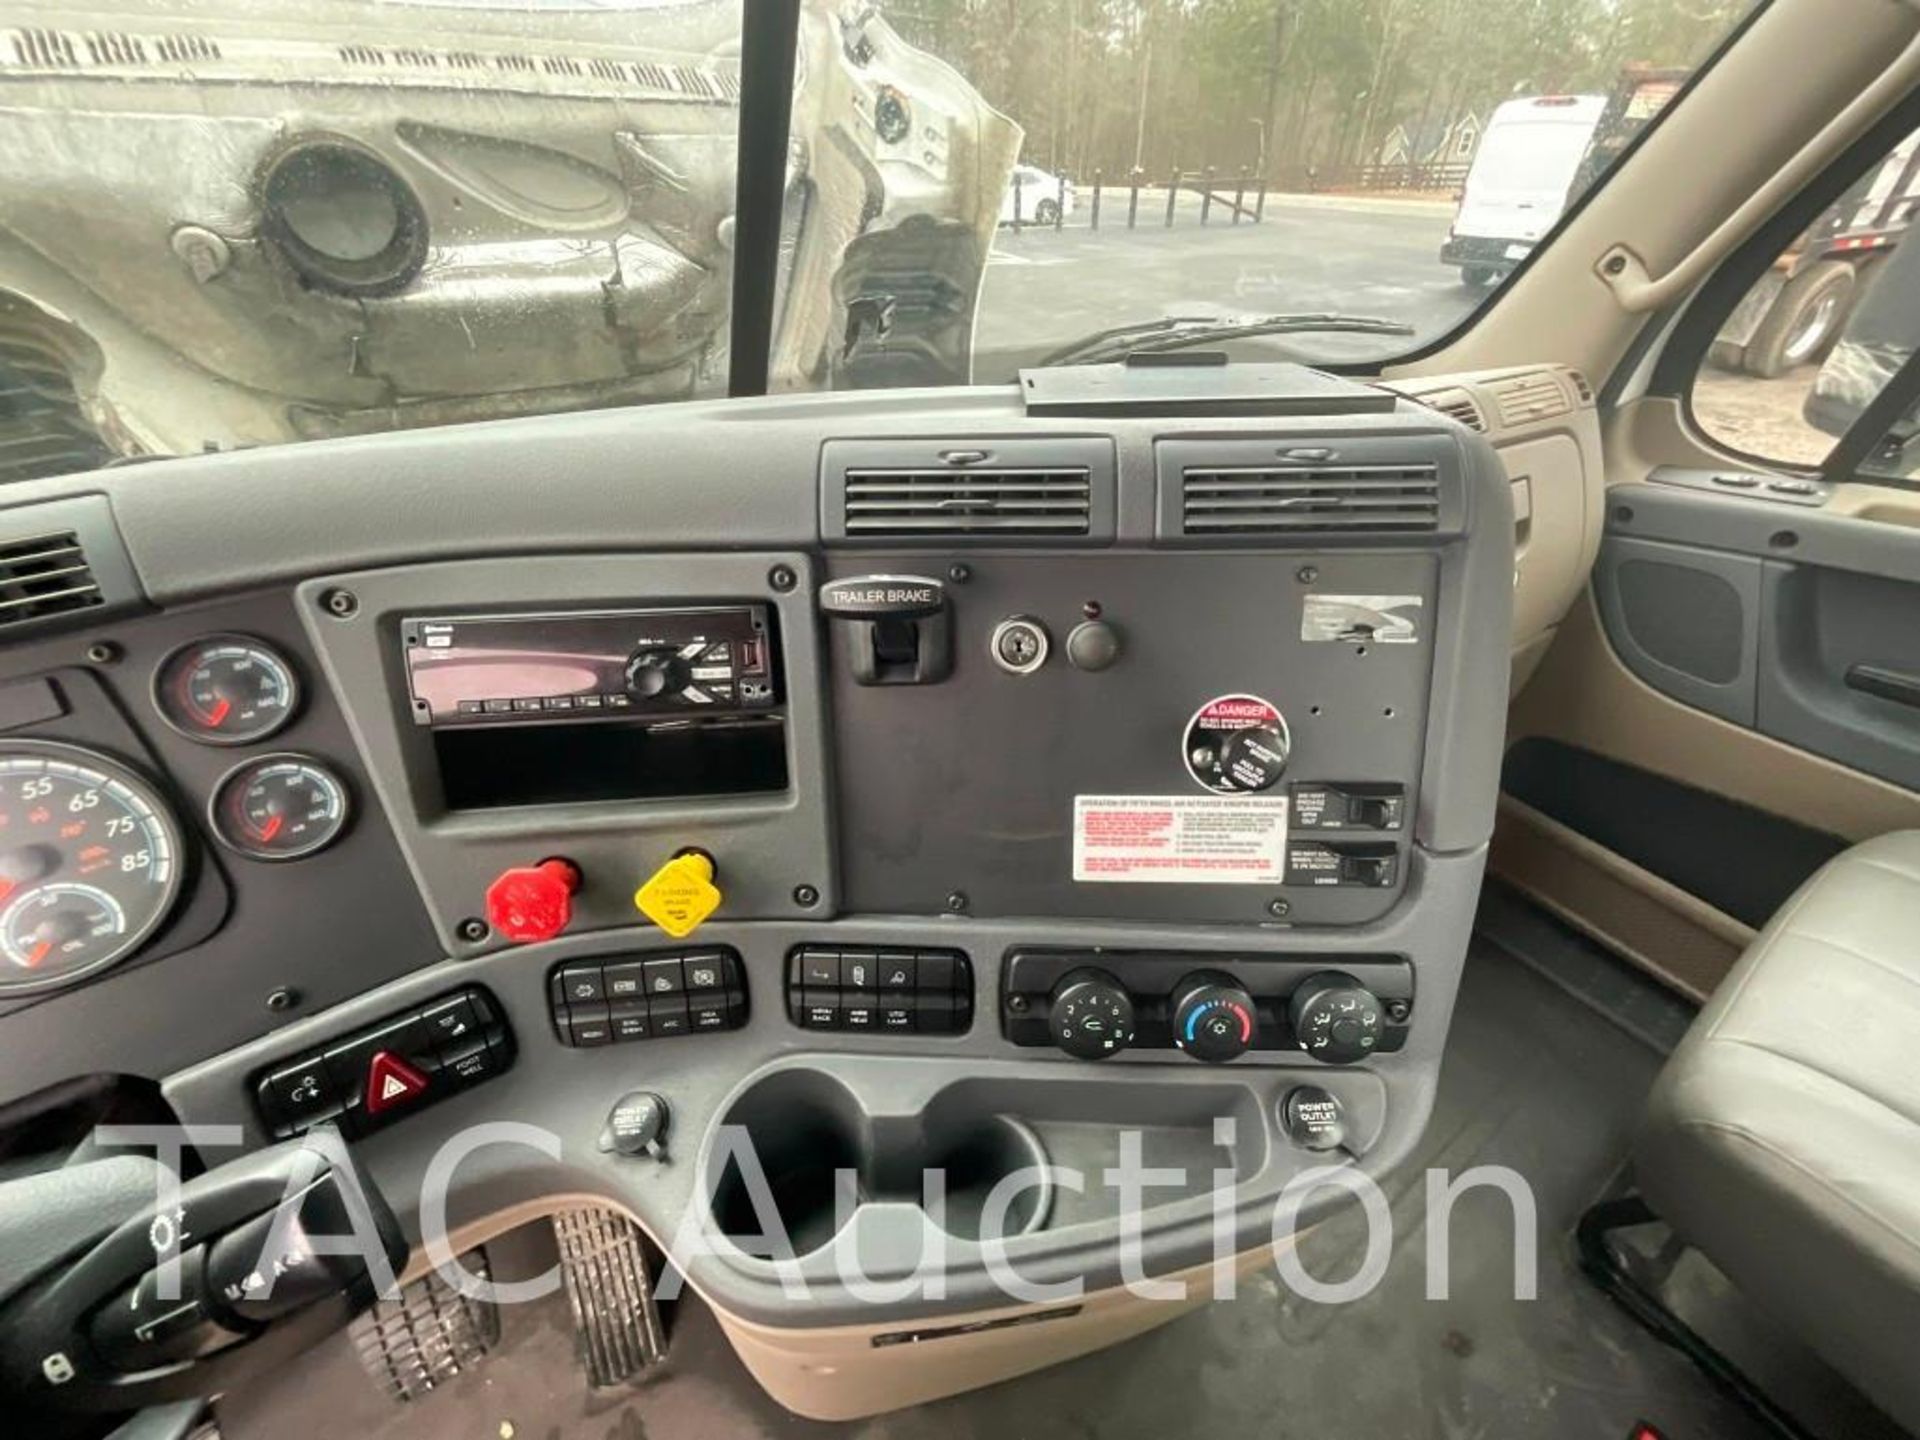 2018 Freightliner Cascadia 125 Day Cab - Image 16 of 56